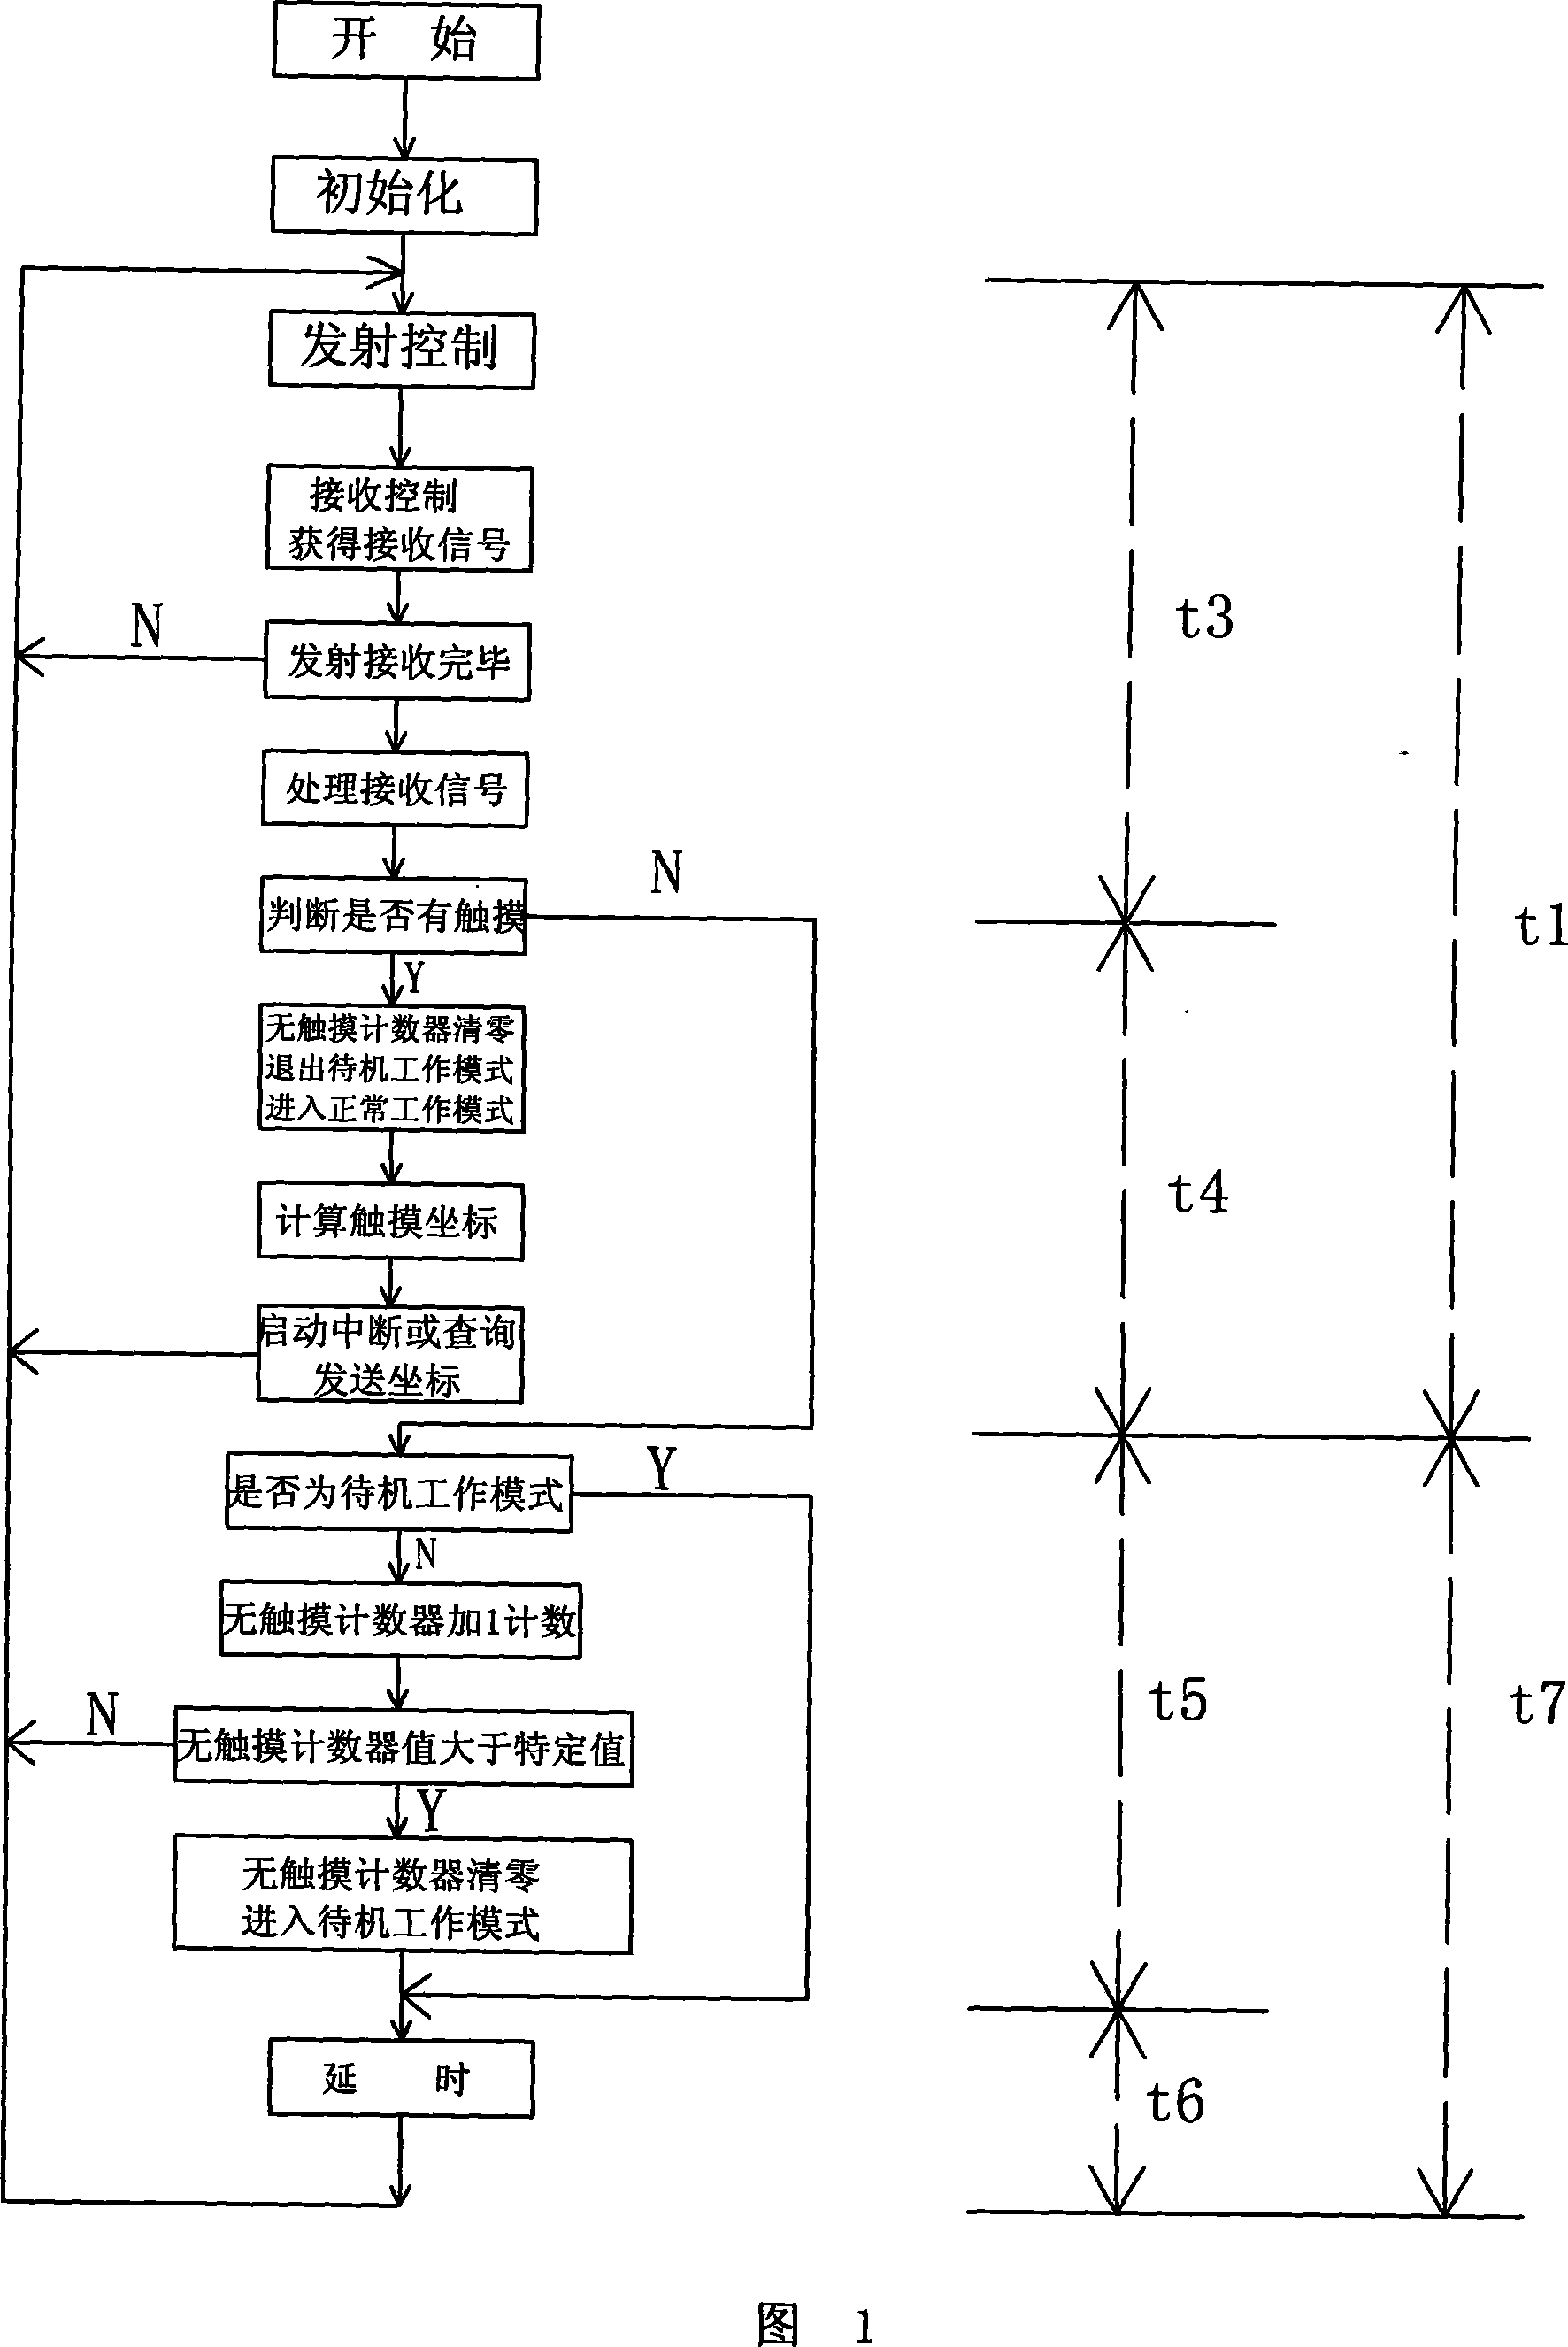 Touch screen multi-operation mode method